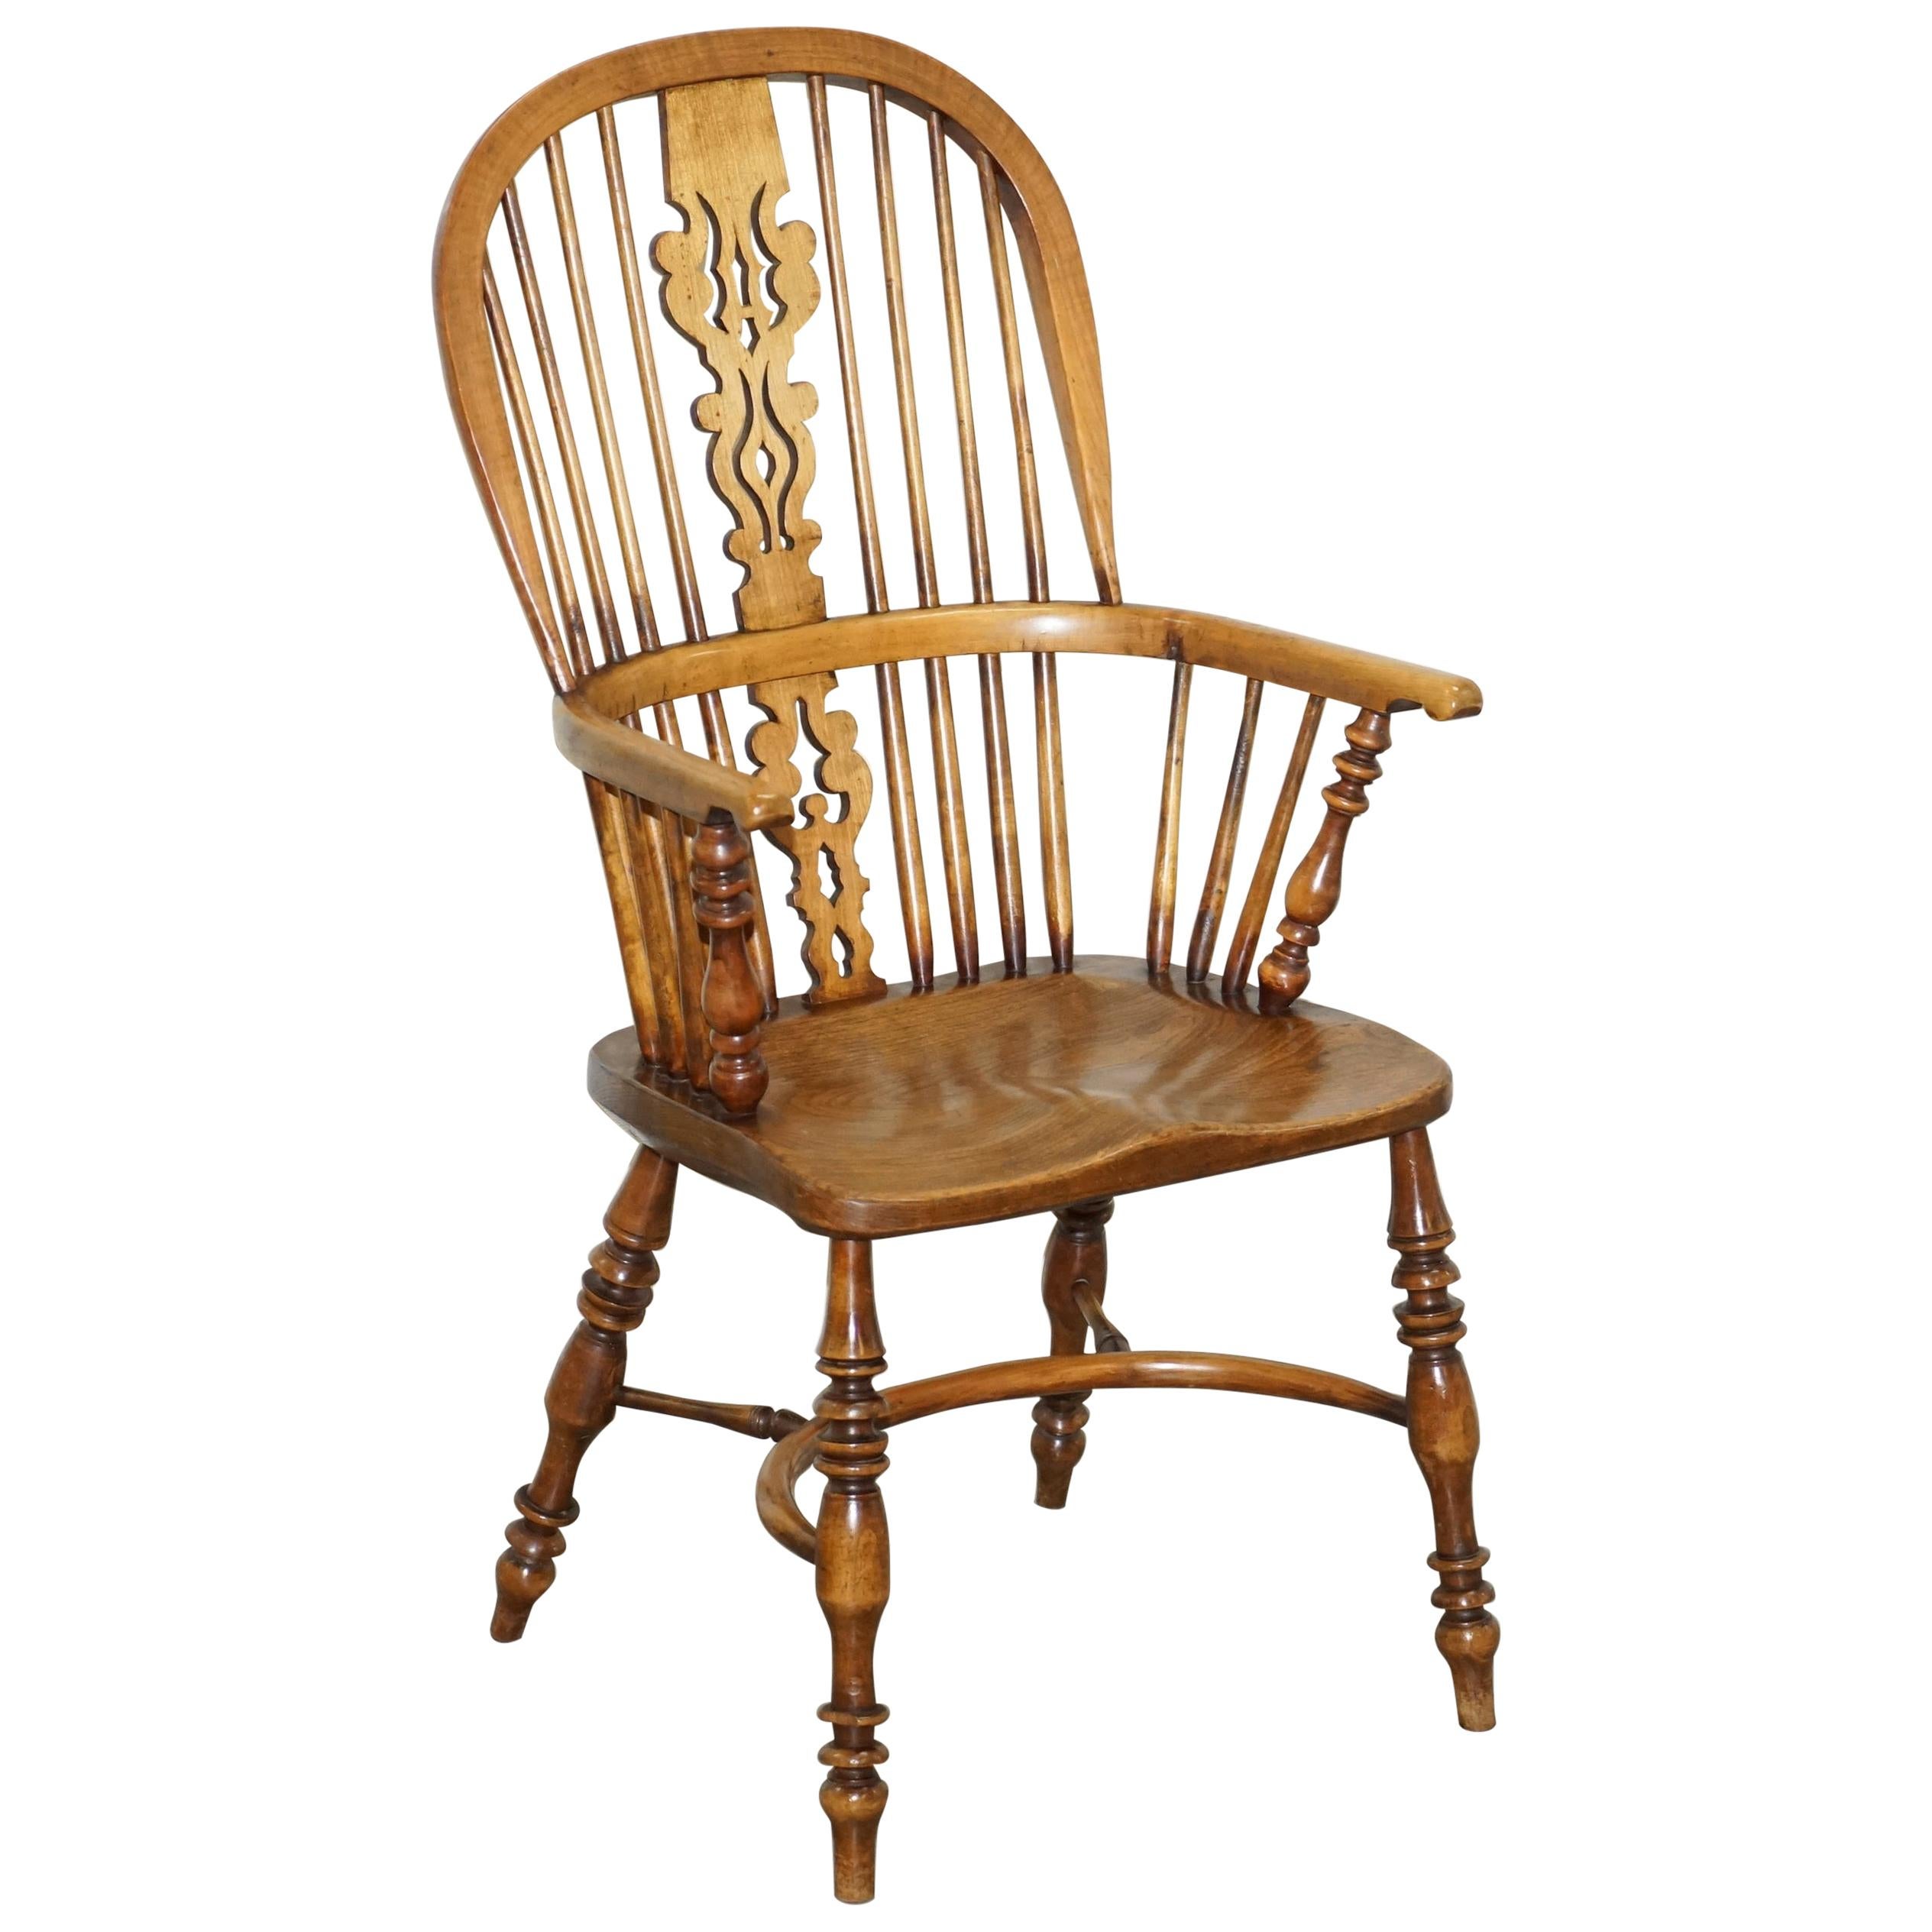 English Classic Antique Victorian 19th Century Elm High Back Windsor Armchair For Sale